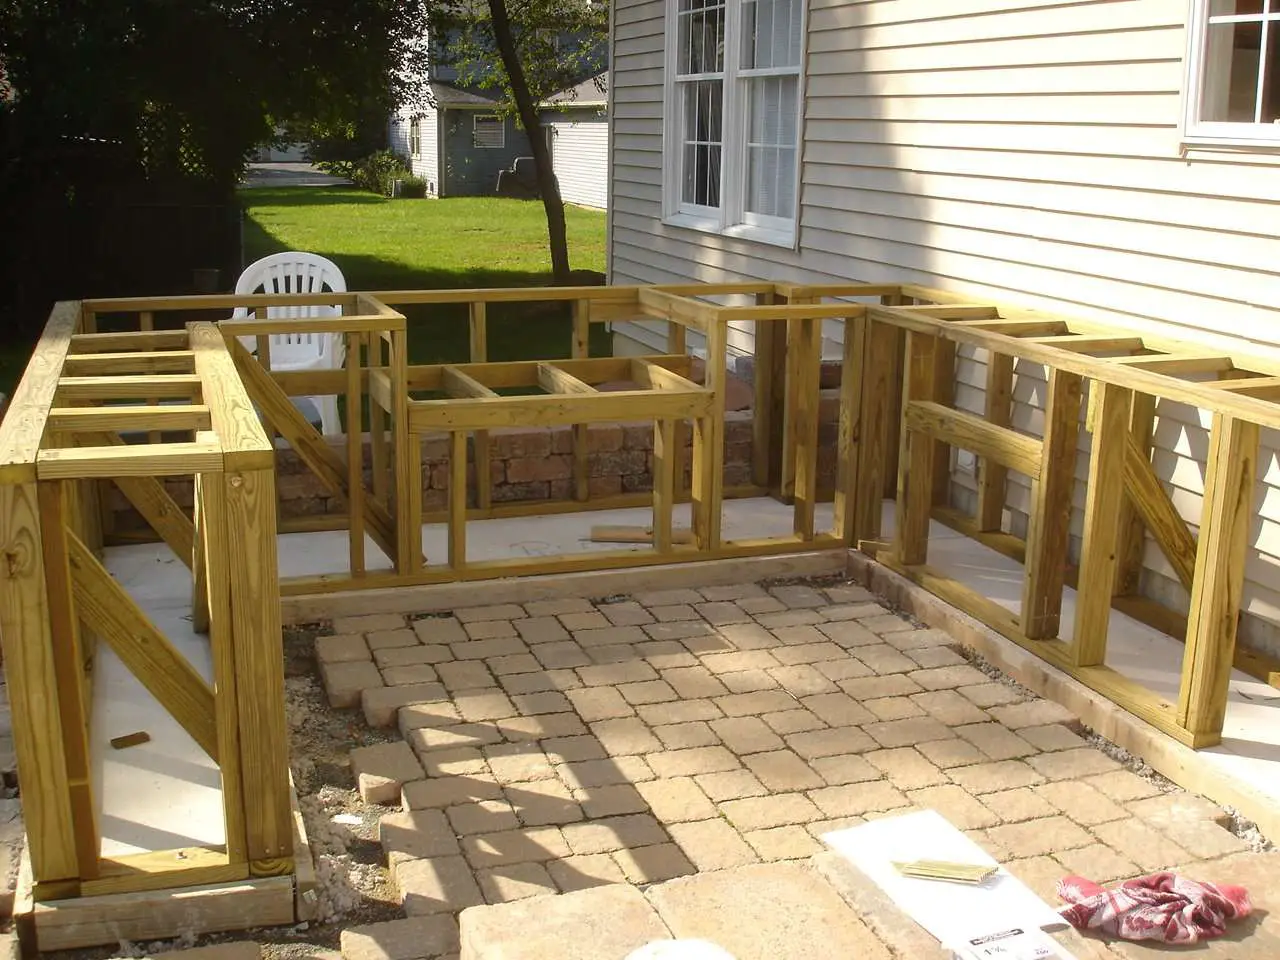 NJ Home Improvement Blog: Outdoor Bar and Grill